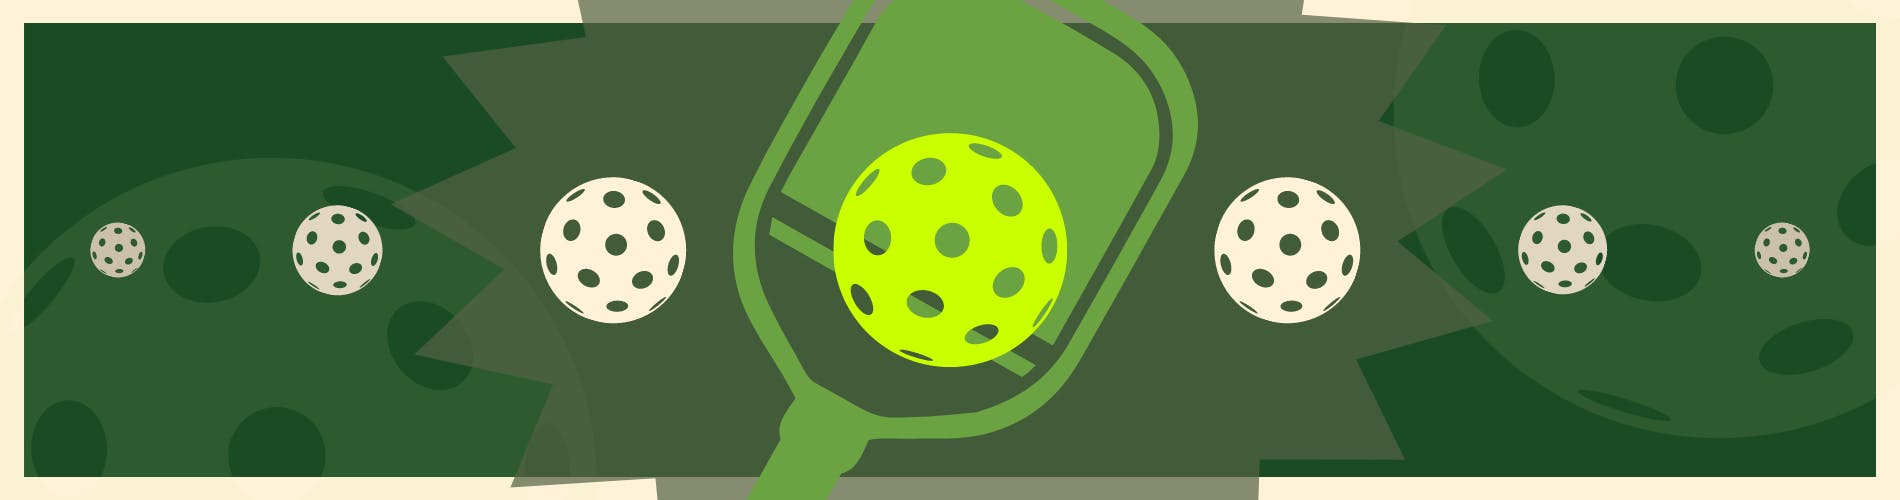 Pickleball paddle and balls in greens and cream.